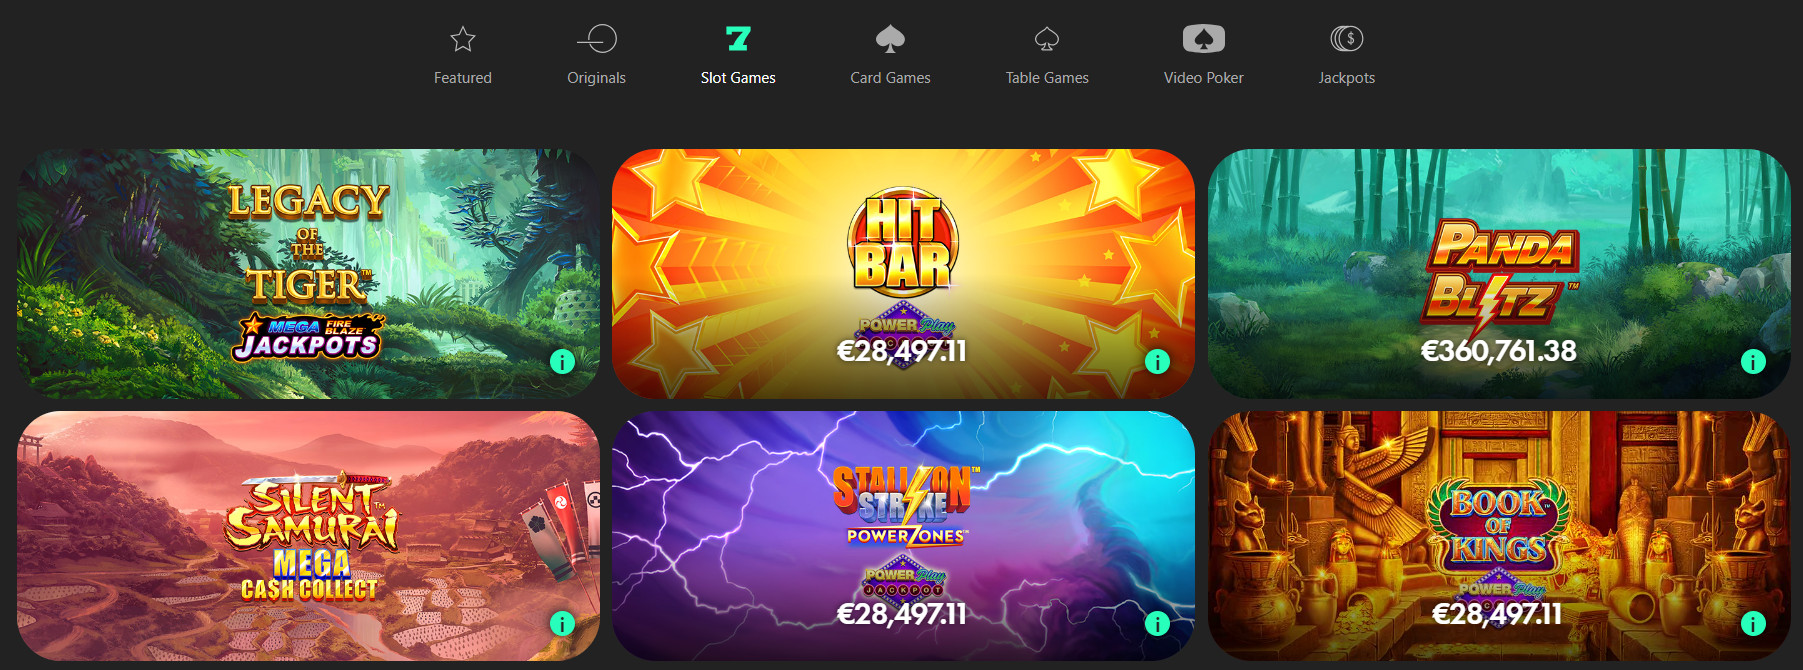 Slots Section at Bet365 Casino